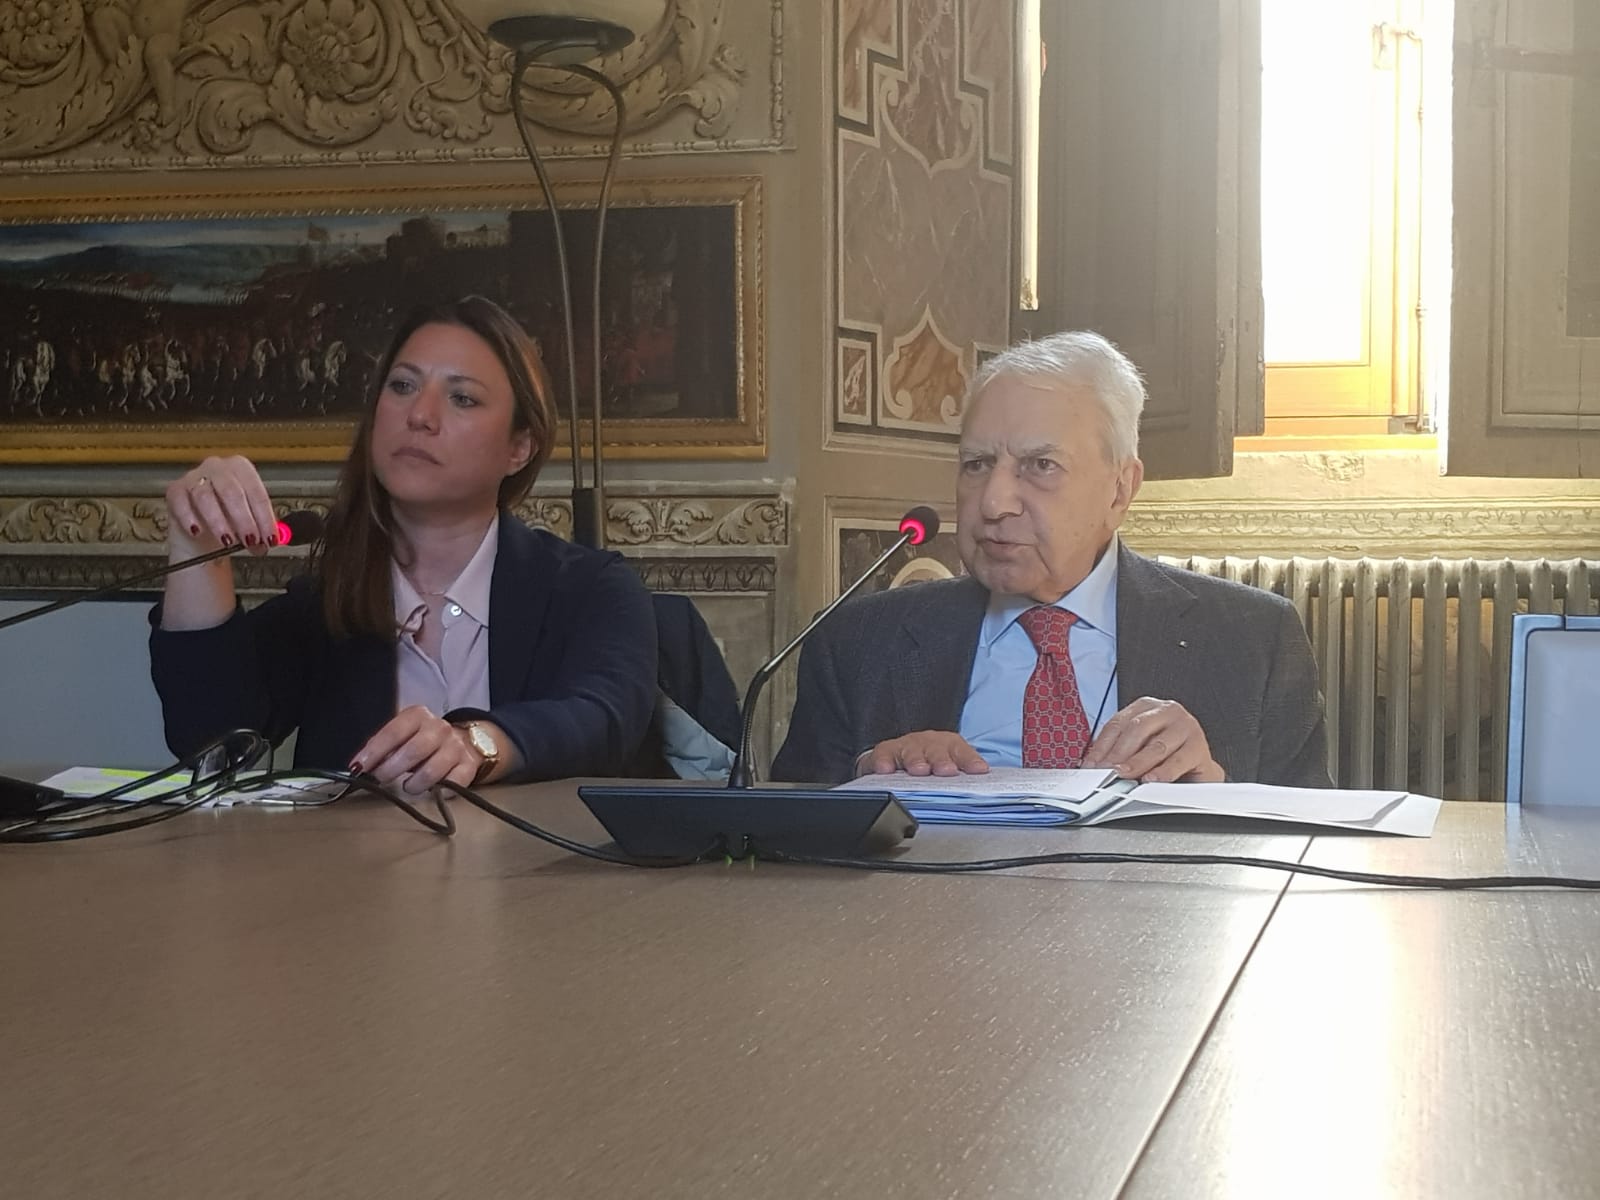 Roma, Liberalism School 2019: Enzo Palumbo´s lessons on “Is our Constitution a liberal one?”